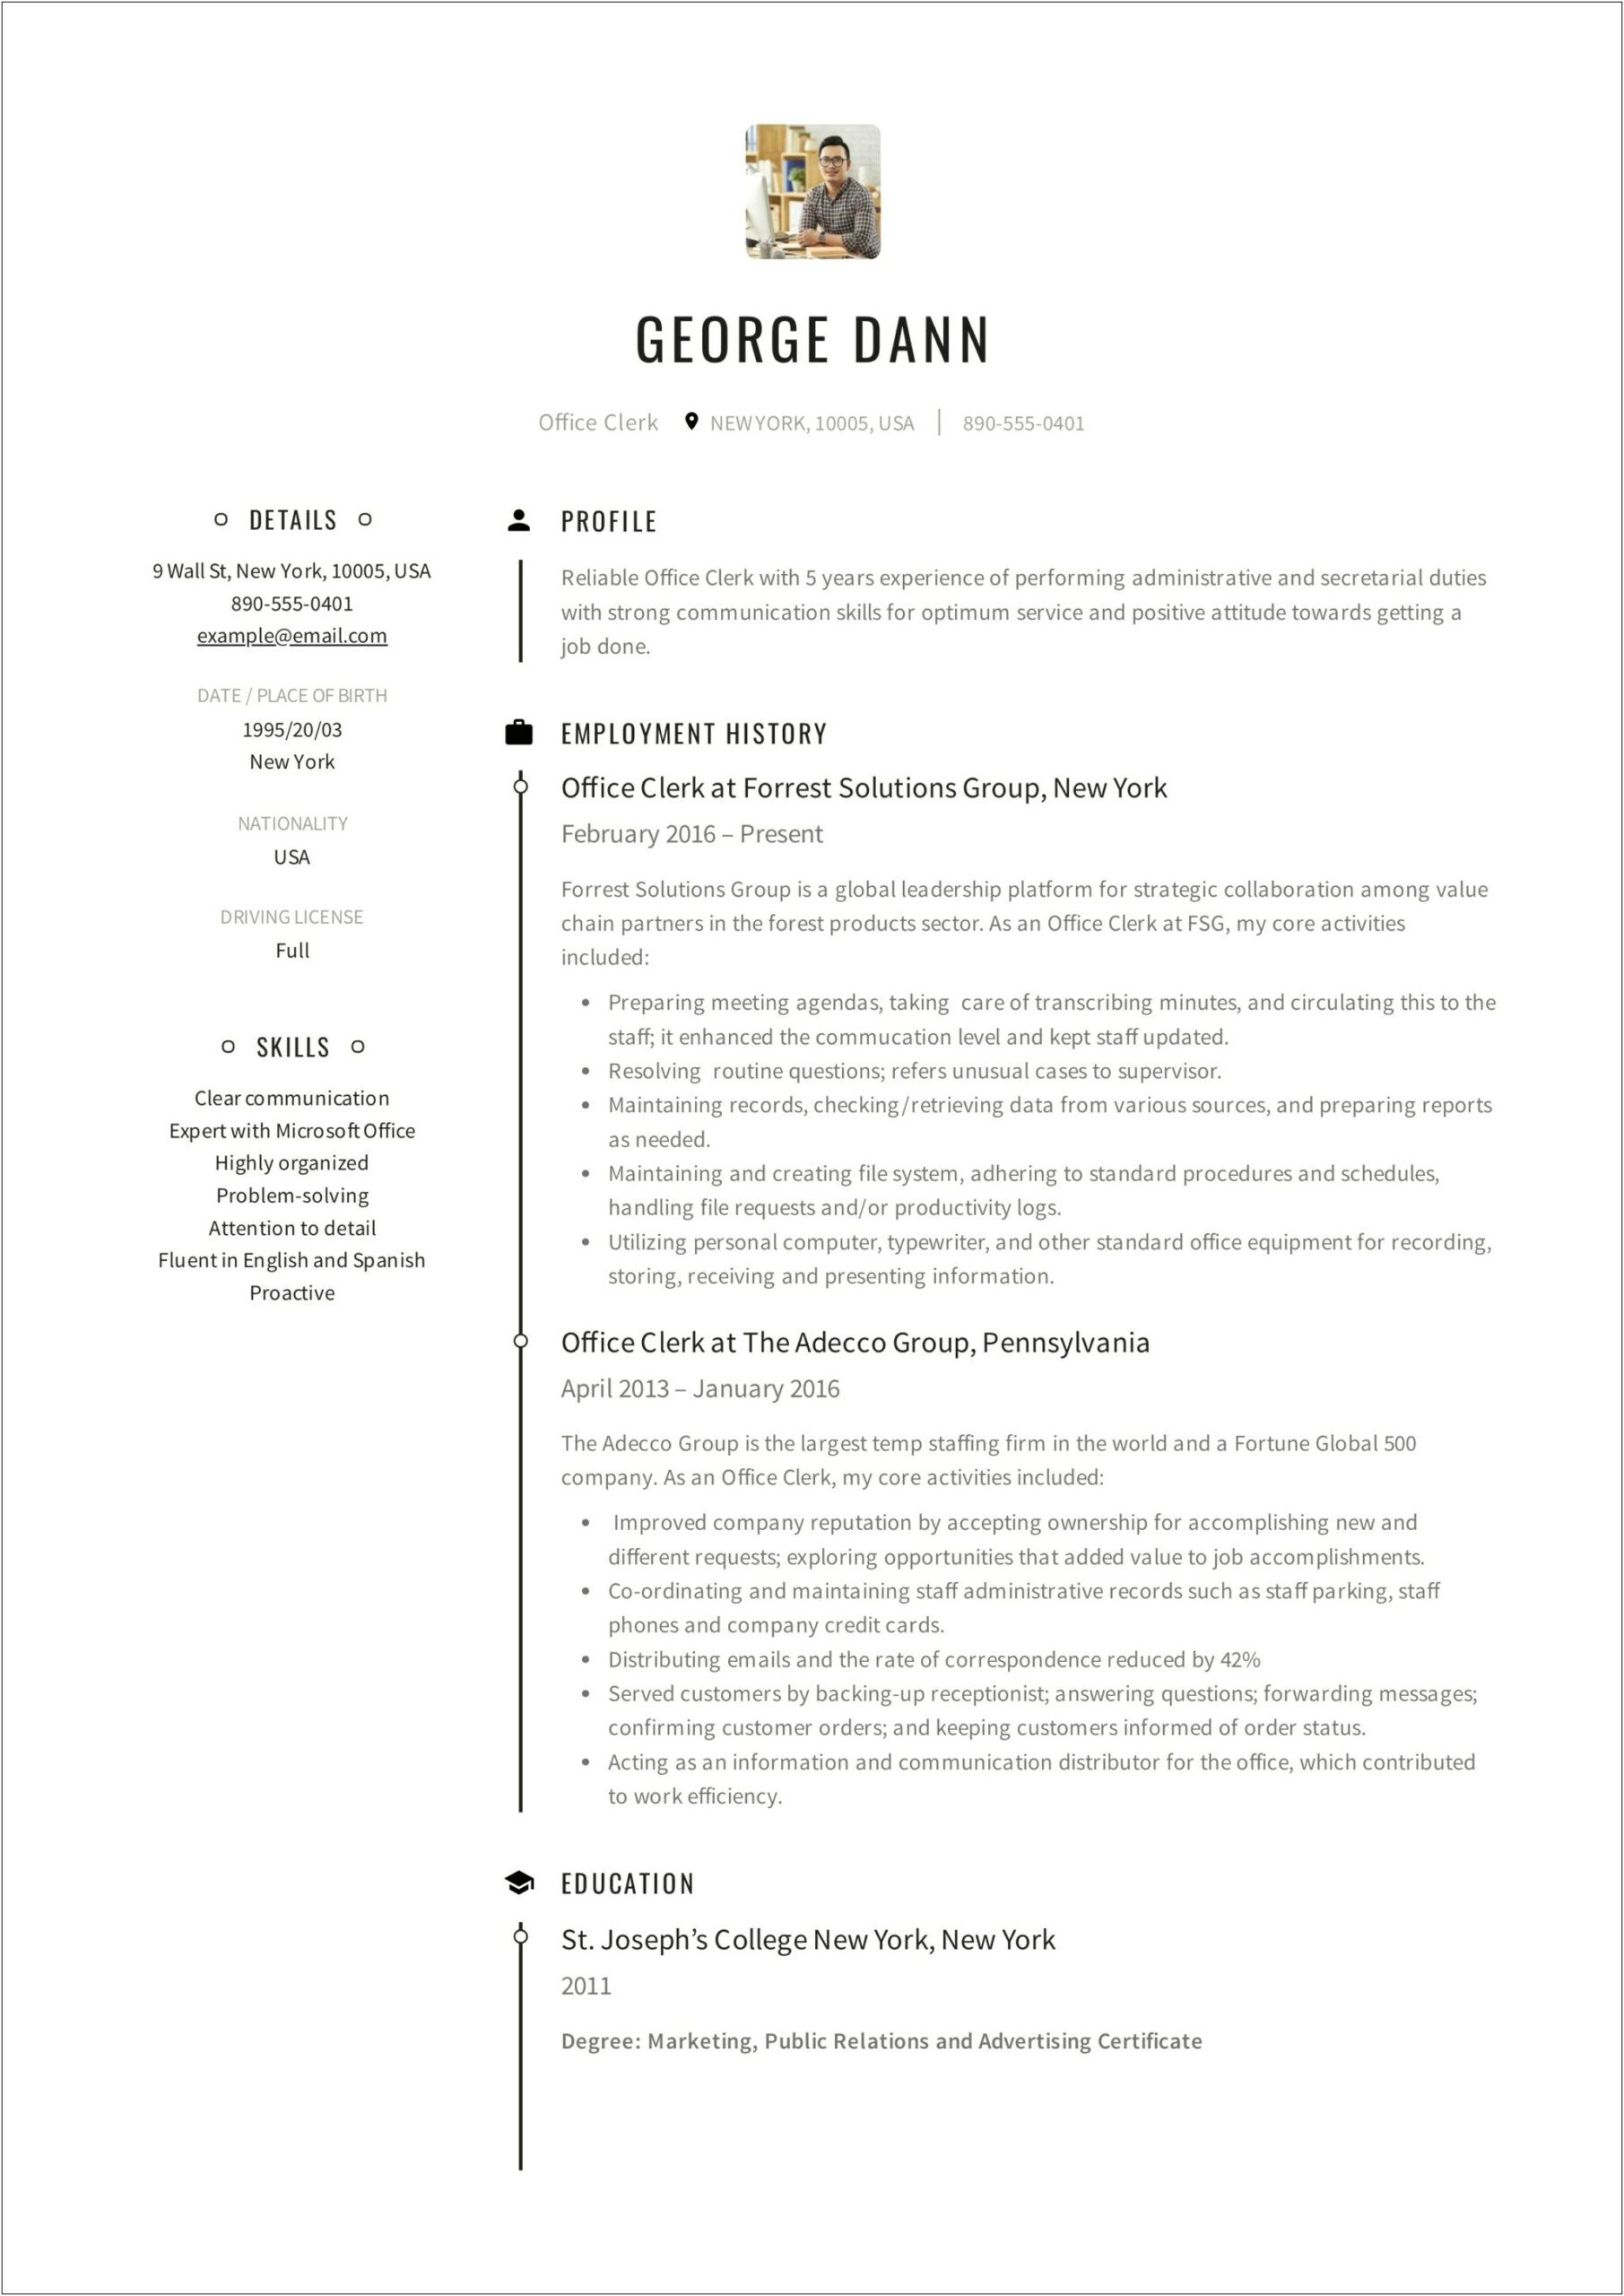 Resume Objective For Clerical Job